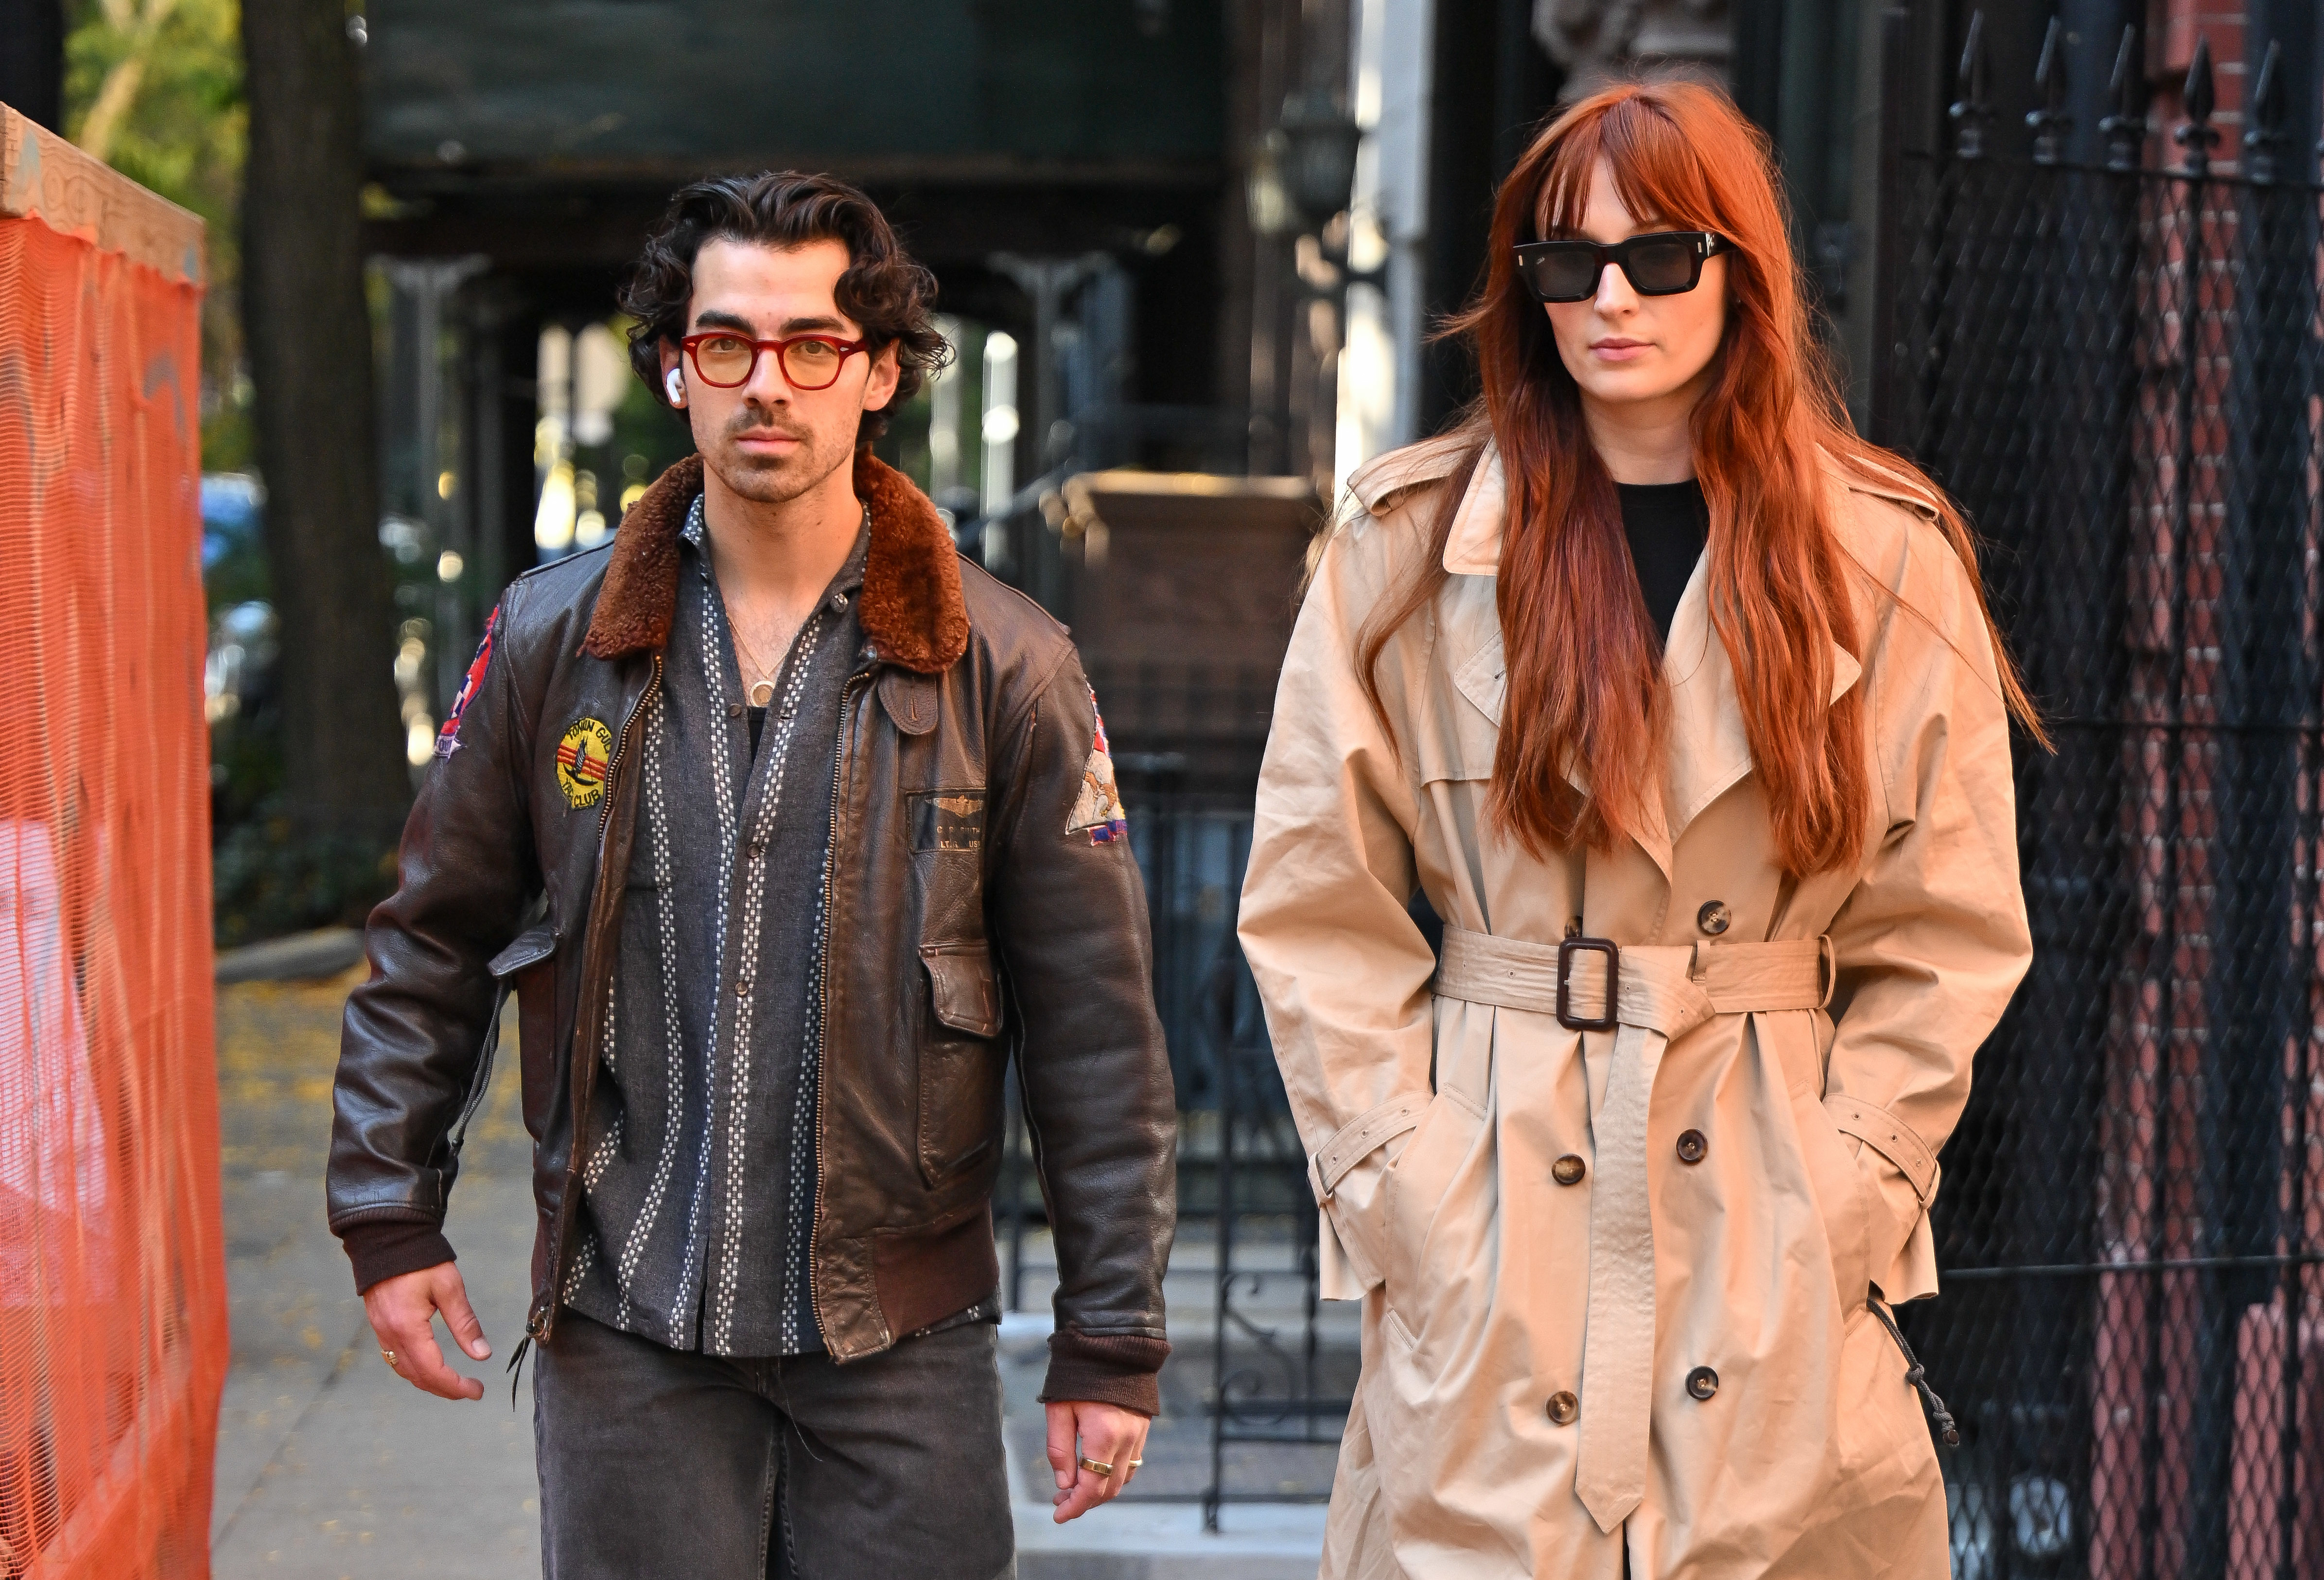 Joe in a leather jacket and Sophie in a trench coat walking on the street